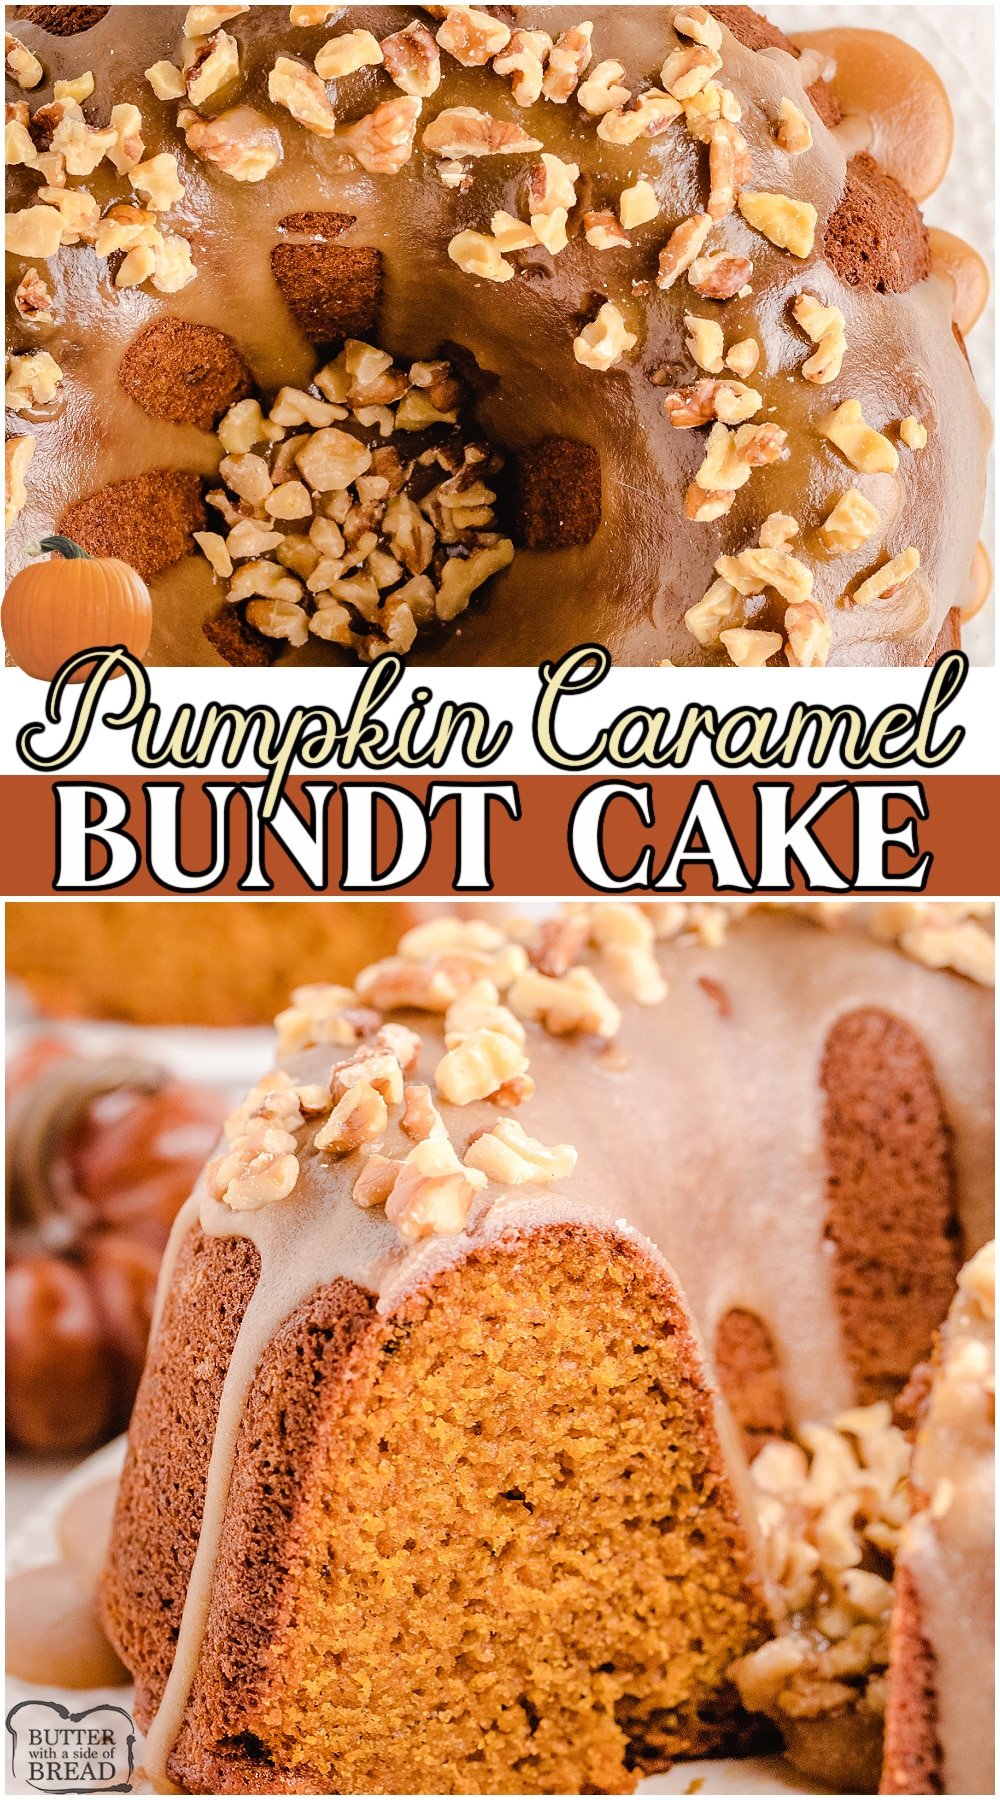 Pumpkin bundt cake with caramel glaze is a moist & flavorful pumpkin cake topped with an easy caramel glaze. Spiced bundt cake recipe made with classic ingredients with flavors perfect for Fall!